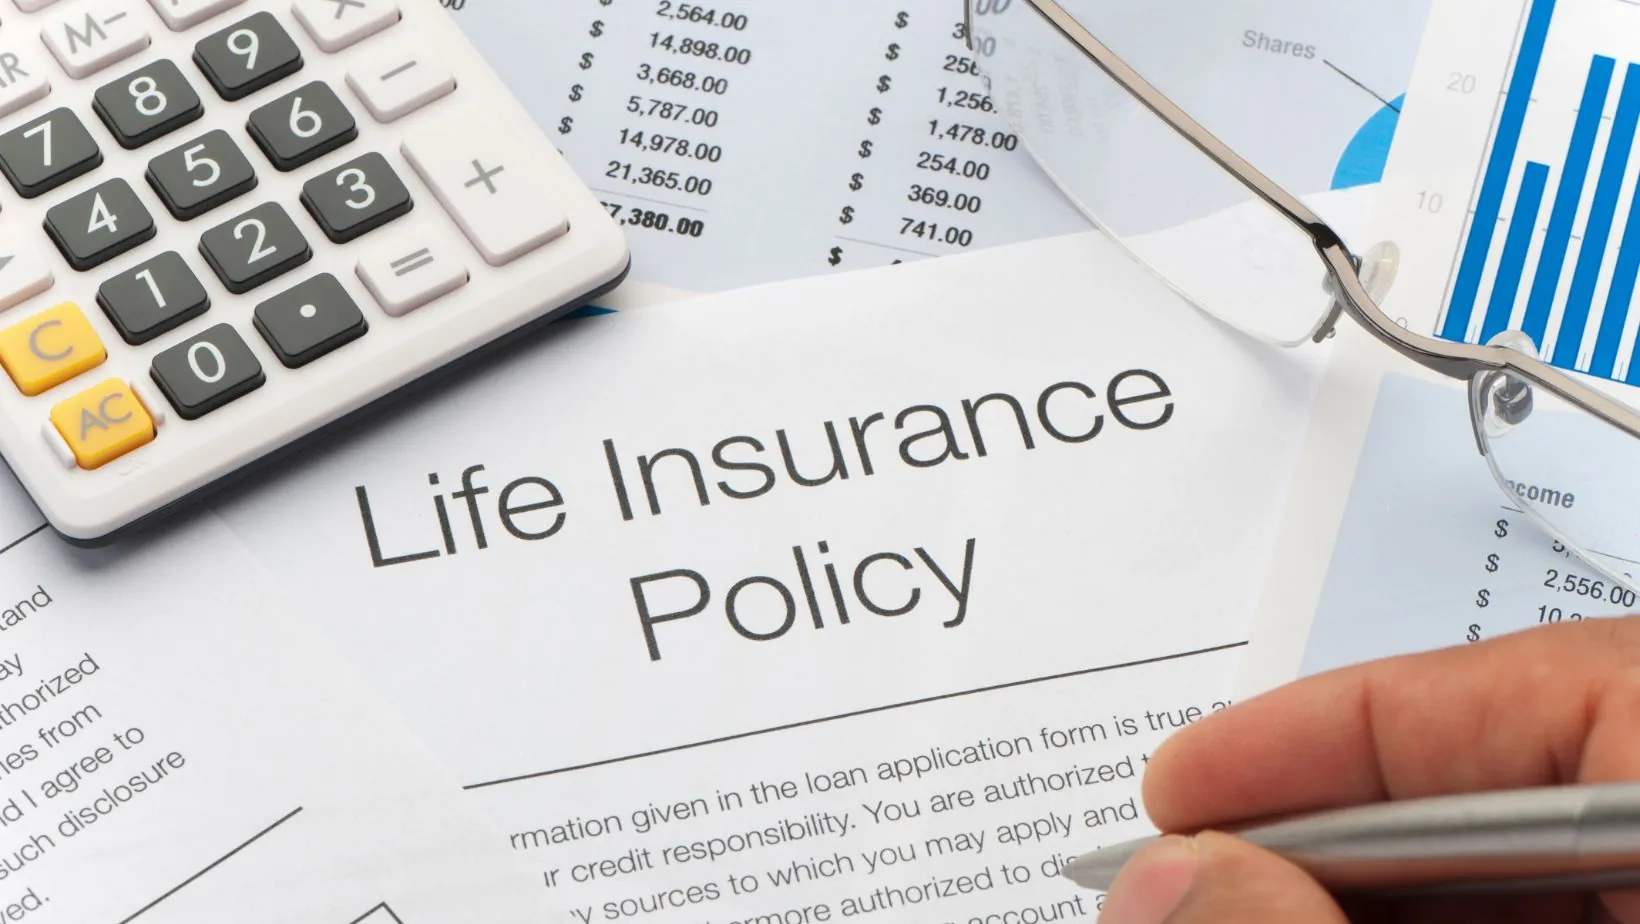 additional coverage can be added to a whole life policy by adding a